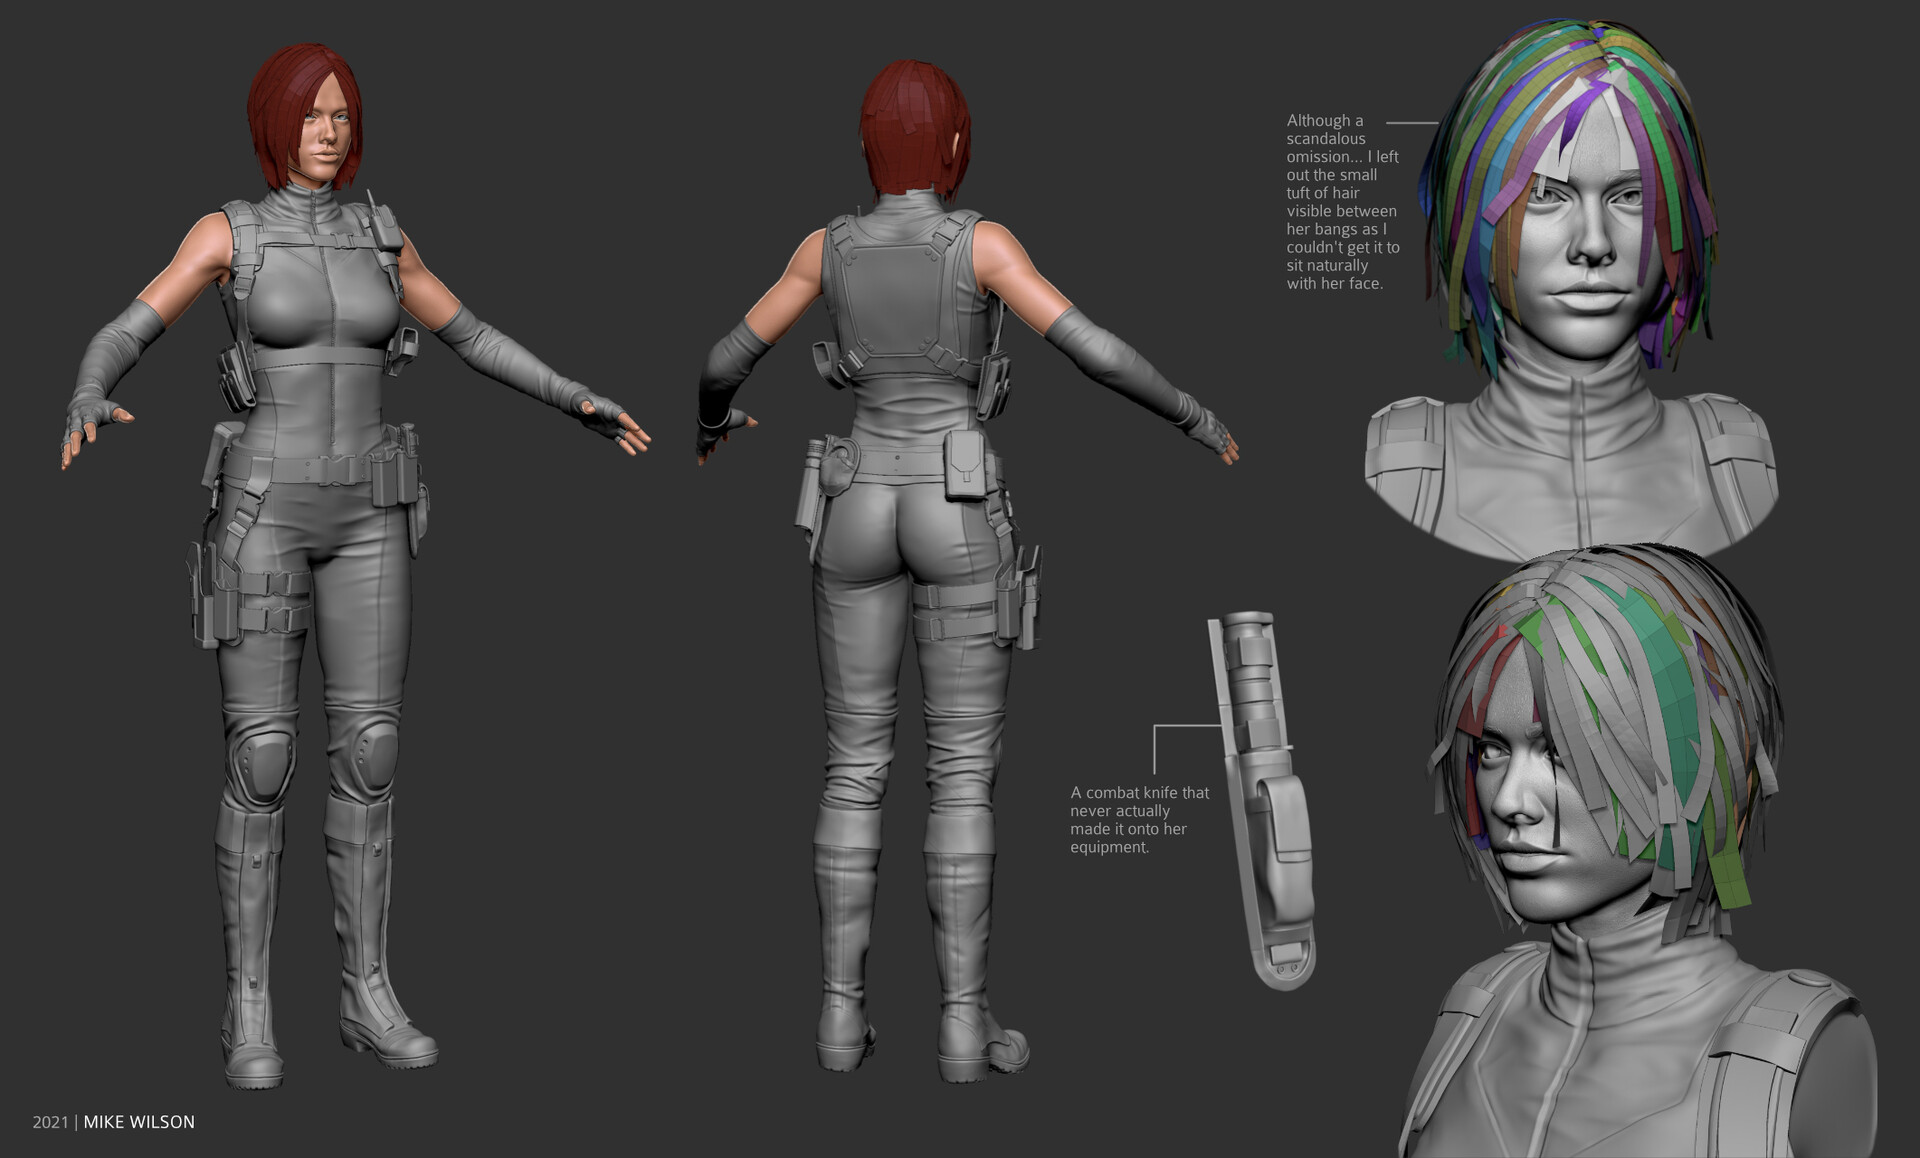 Regina from Dino Crisis Gets a Stunning Unreal Engine 5 Remake